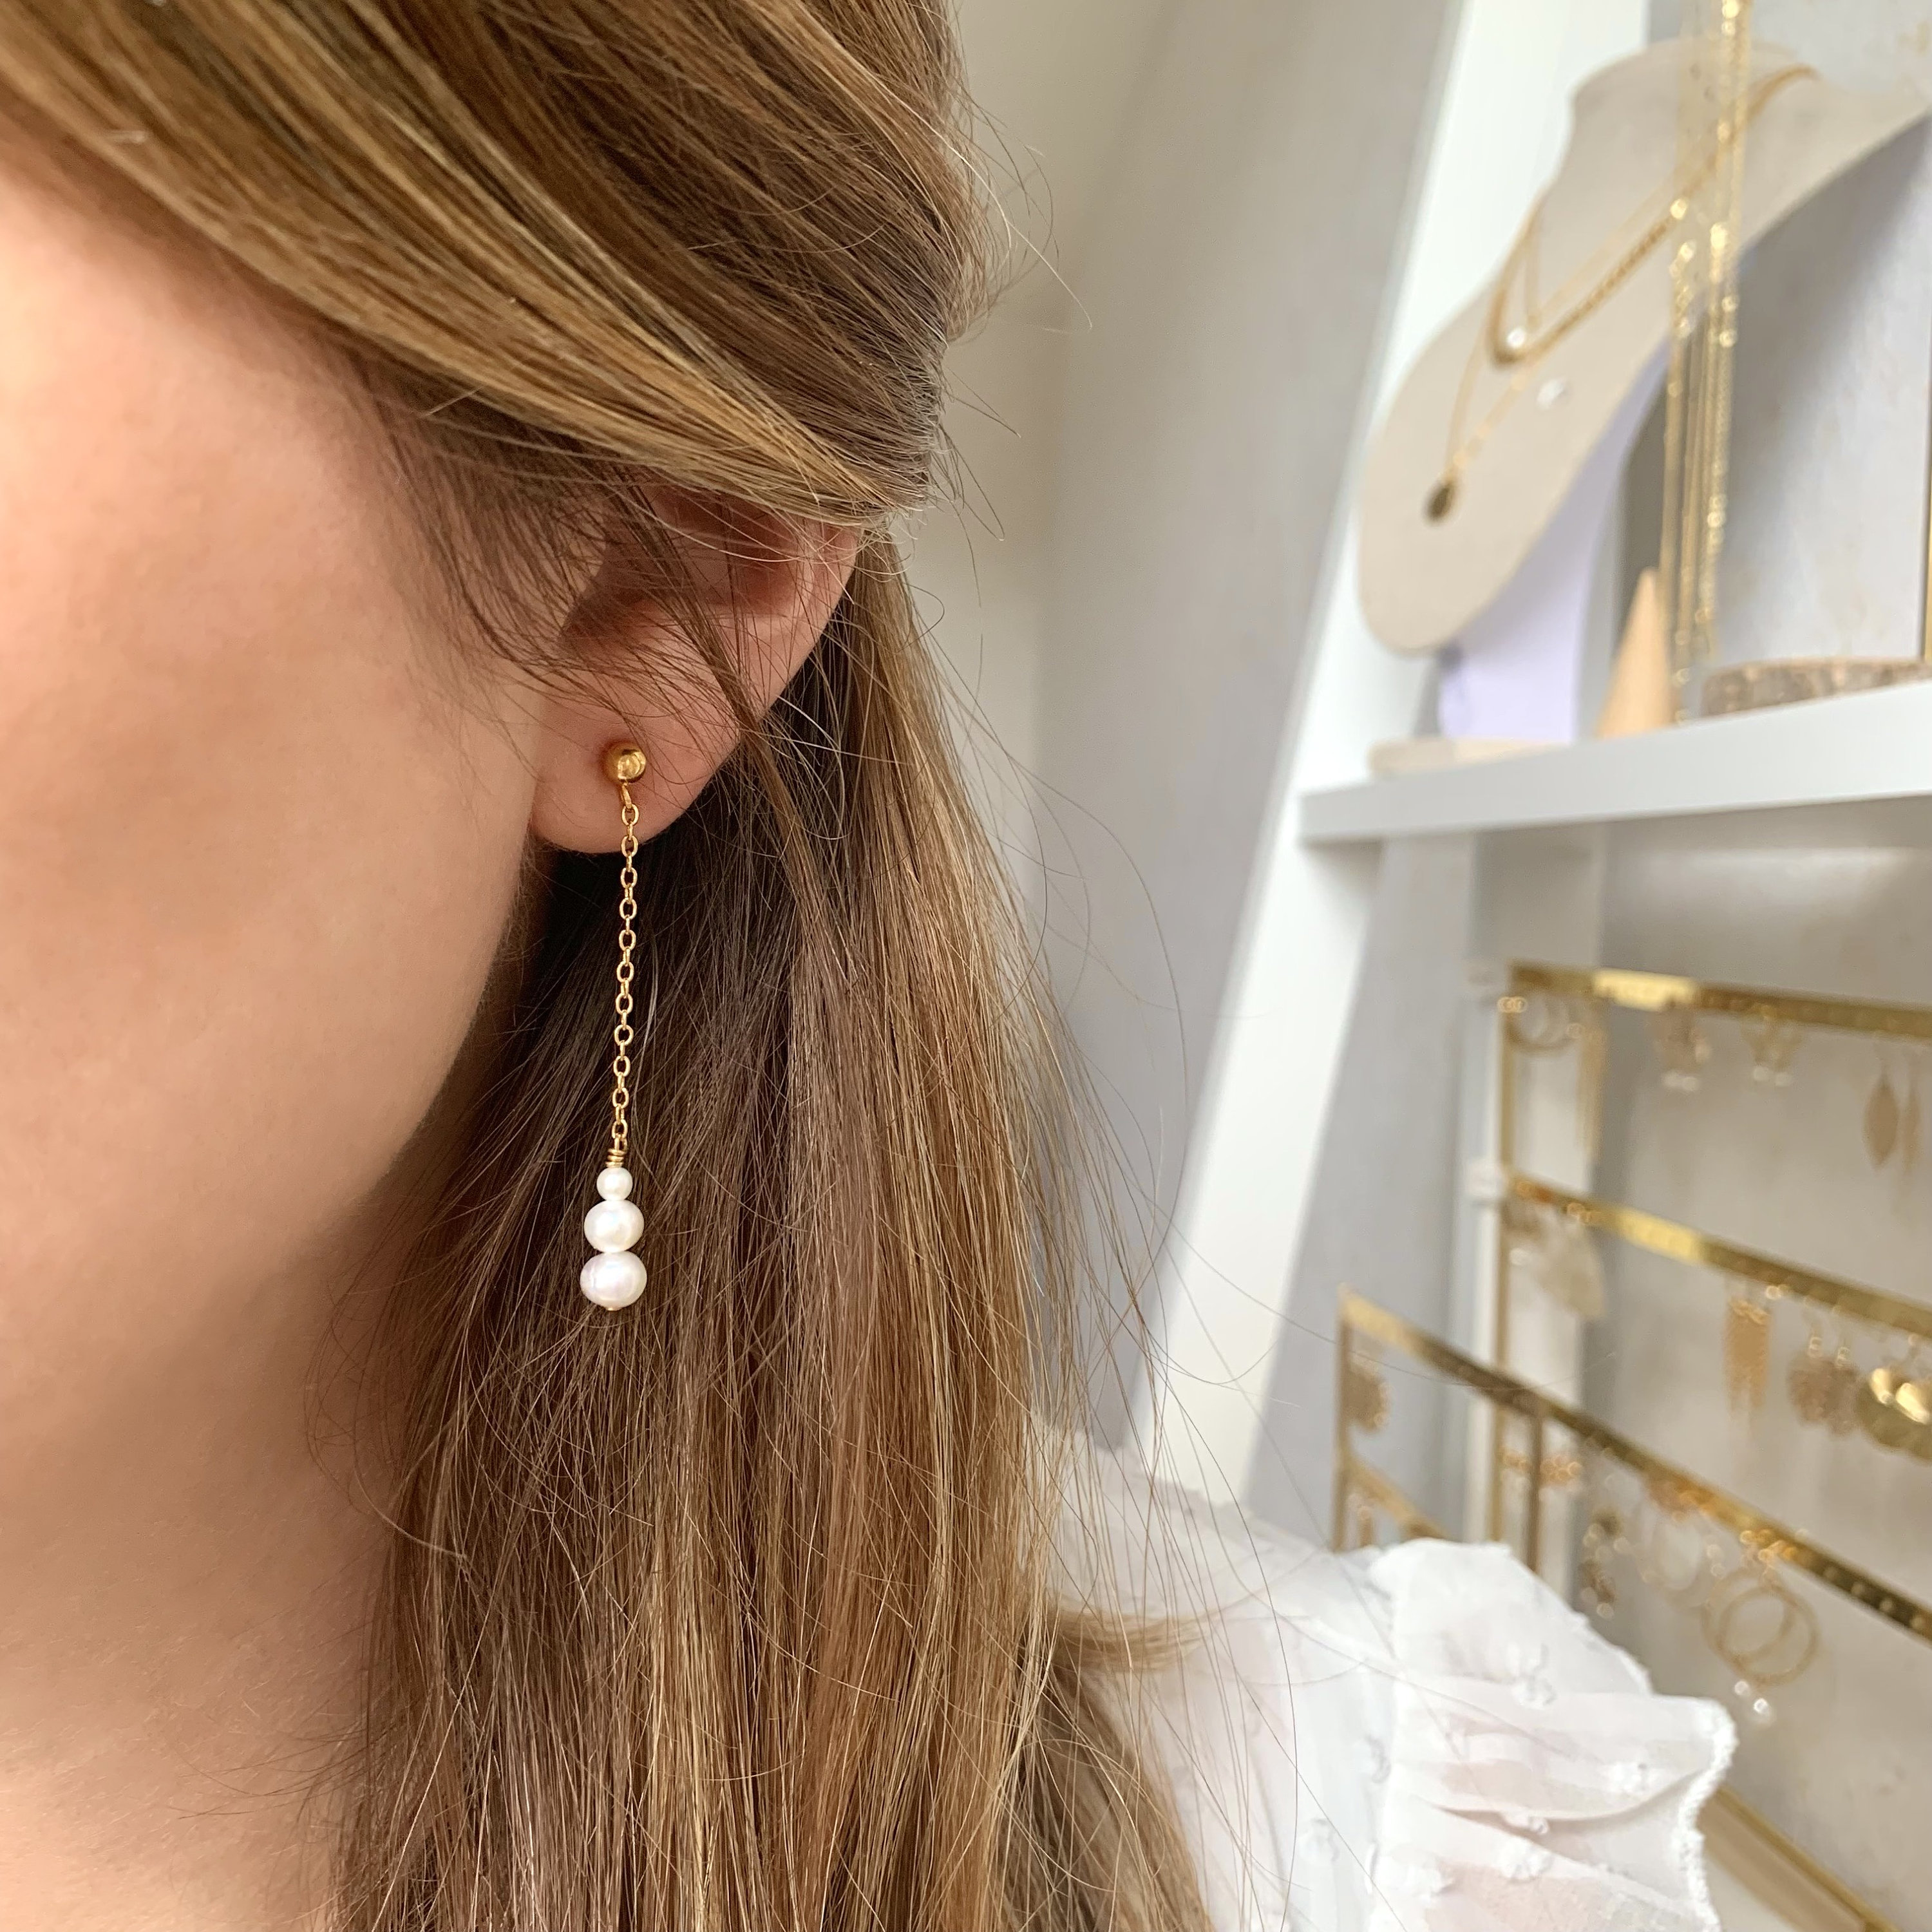 Women's Dangling Earrings With Three Mother-of-pearl 